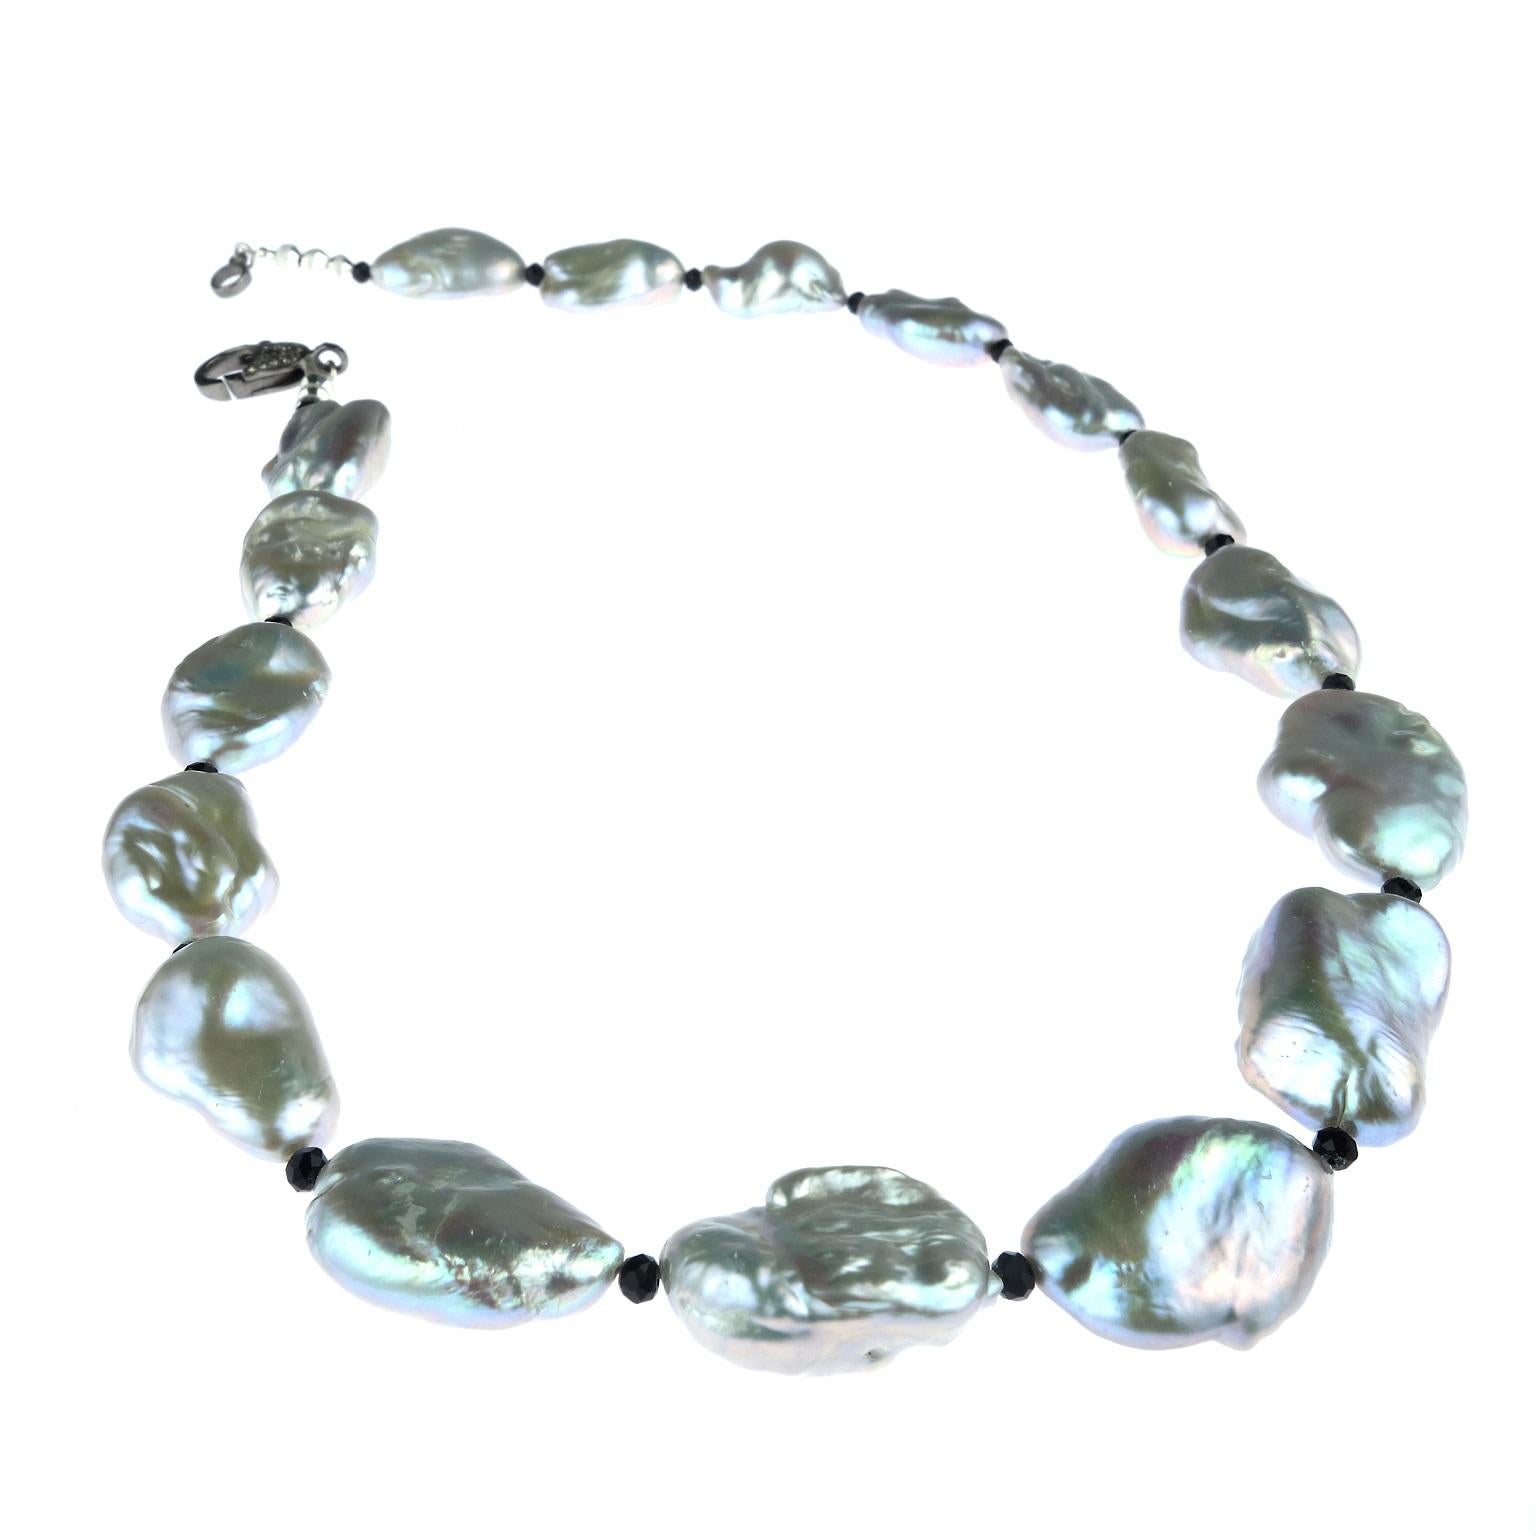 Iridescent Silvery Baroque Pearl Necklace